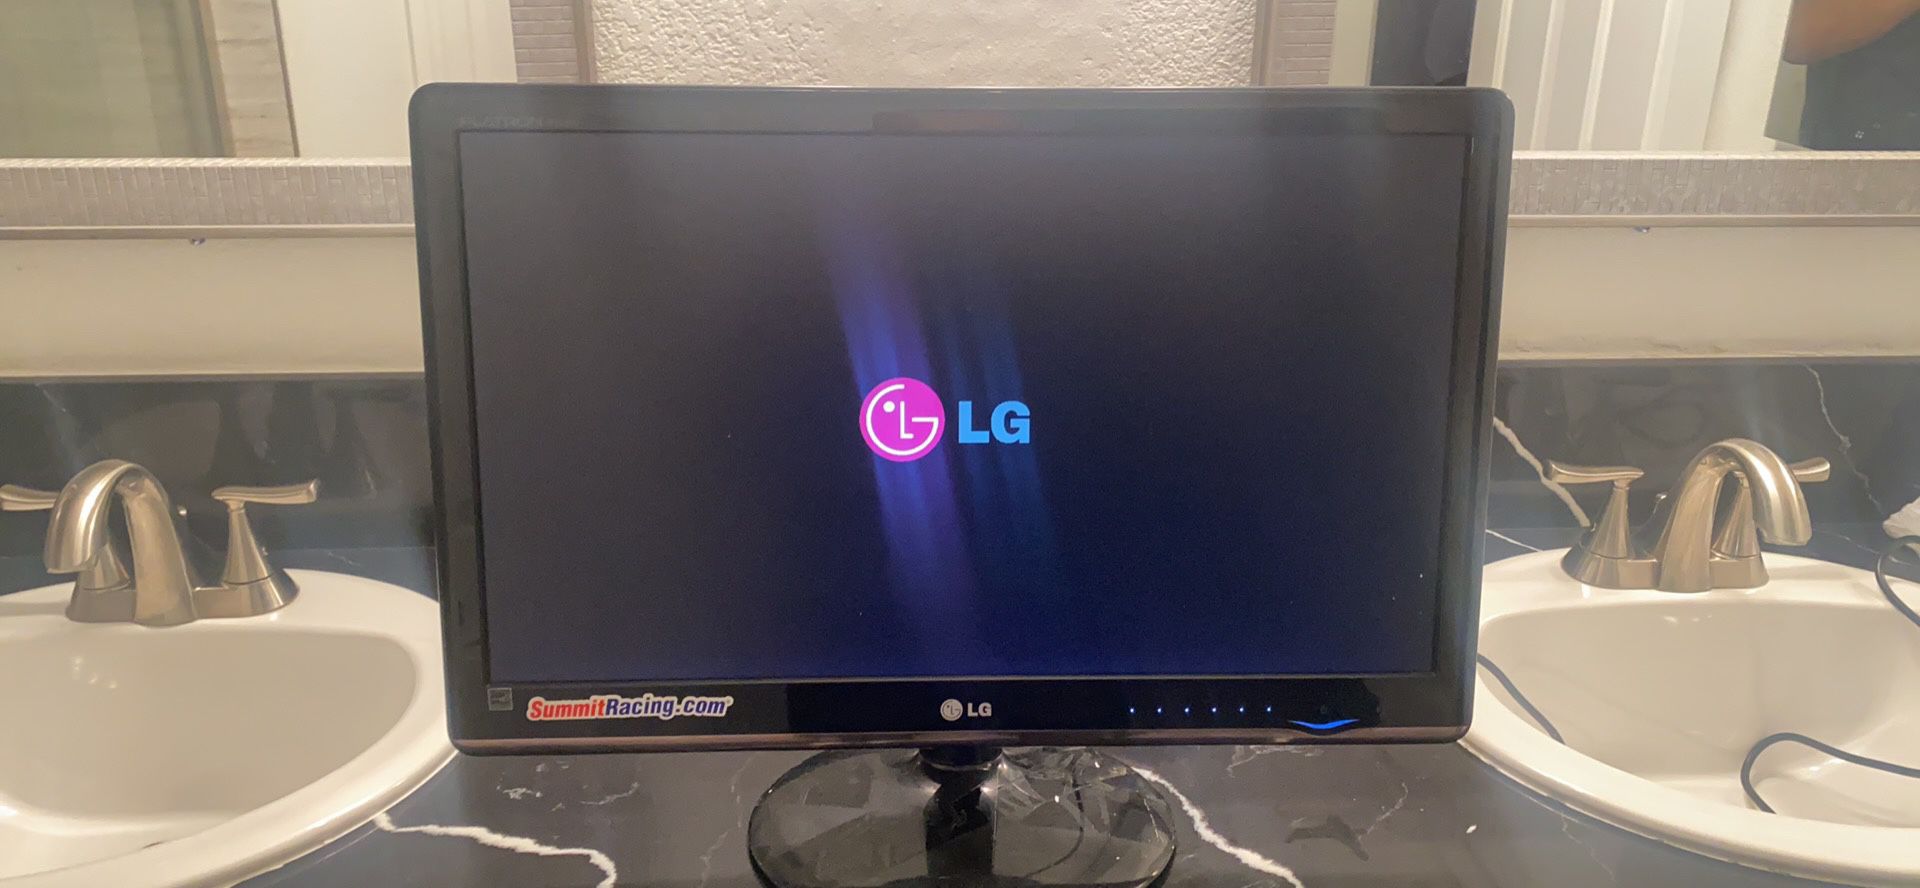 LG 23in Flat Computer Monitor